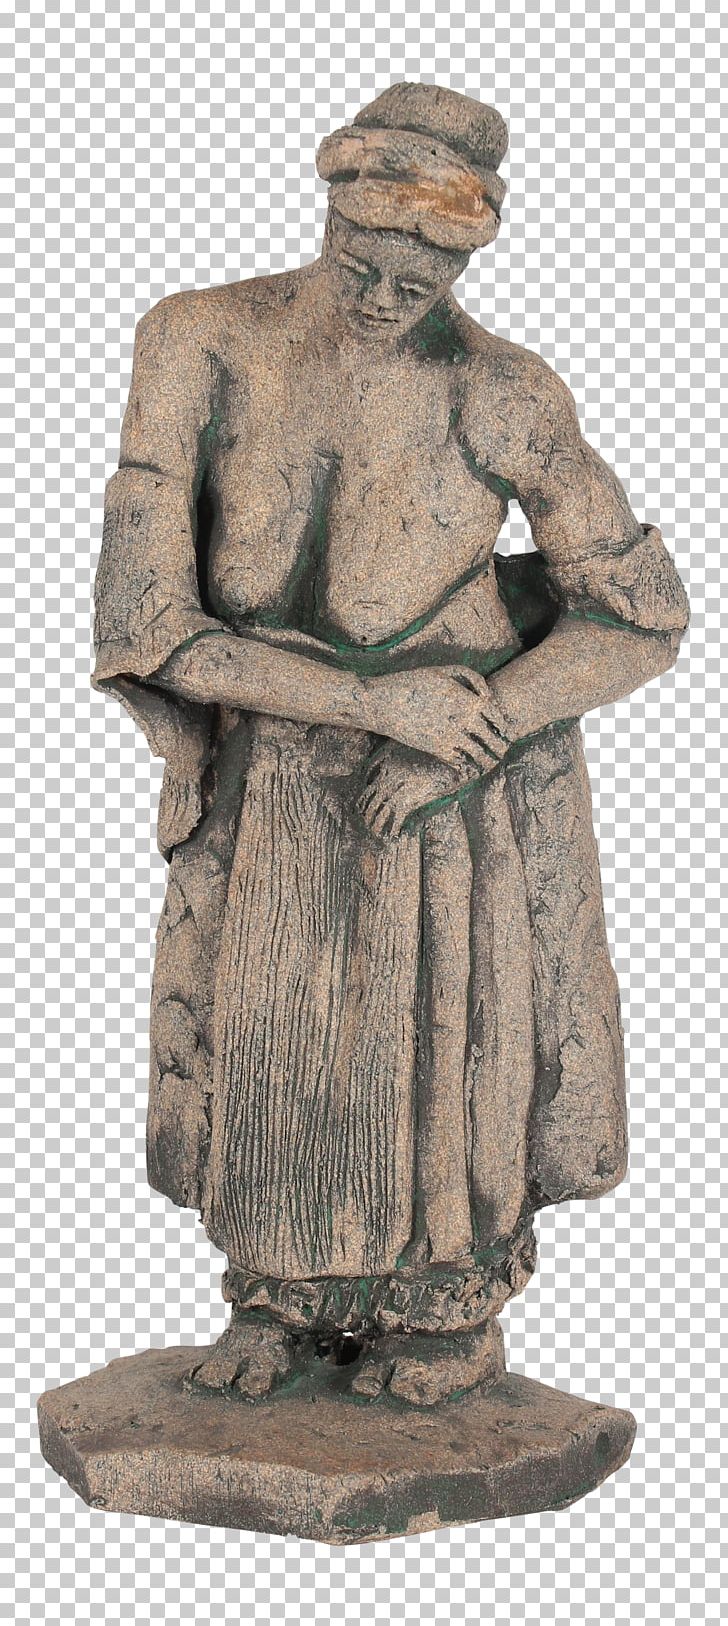 Statue Sculpture Art Figurine Carving PNG, Clipart, Acrylic Paint, Ancient History, Antique, Archaeological Site, Archaeology Free PNG Download